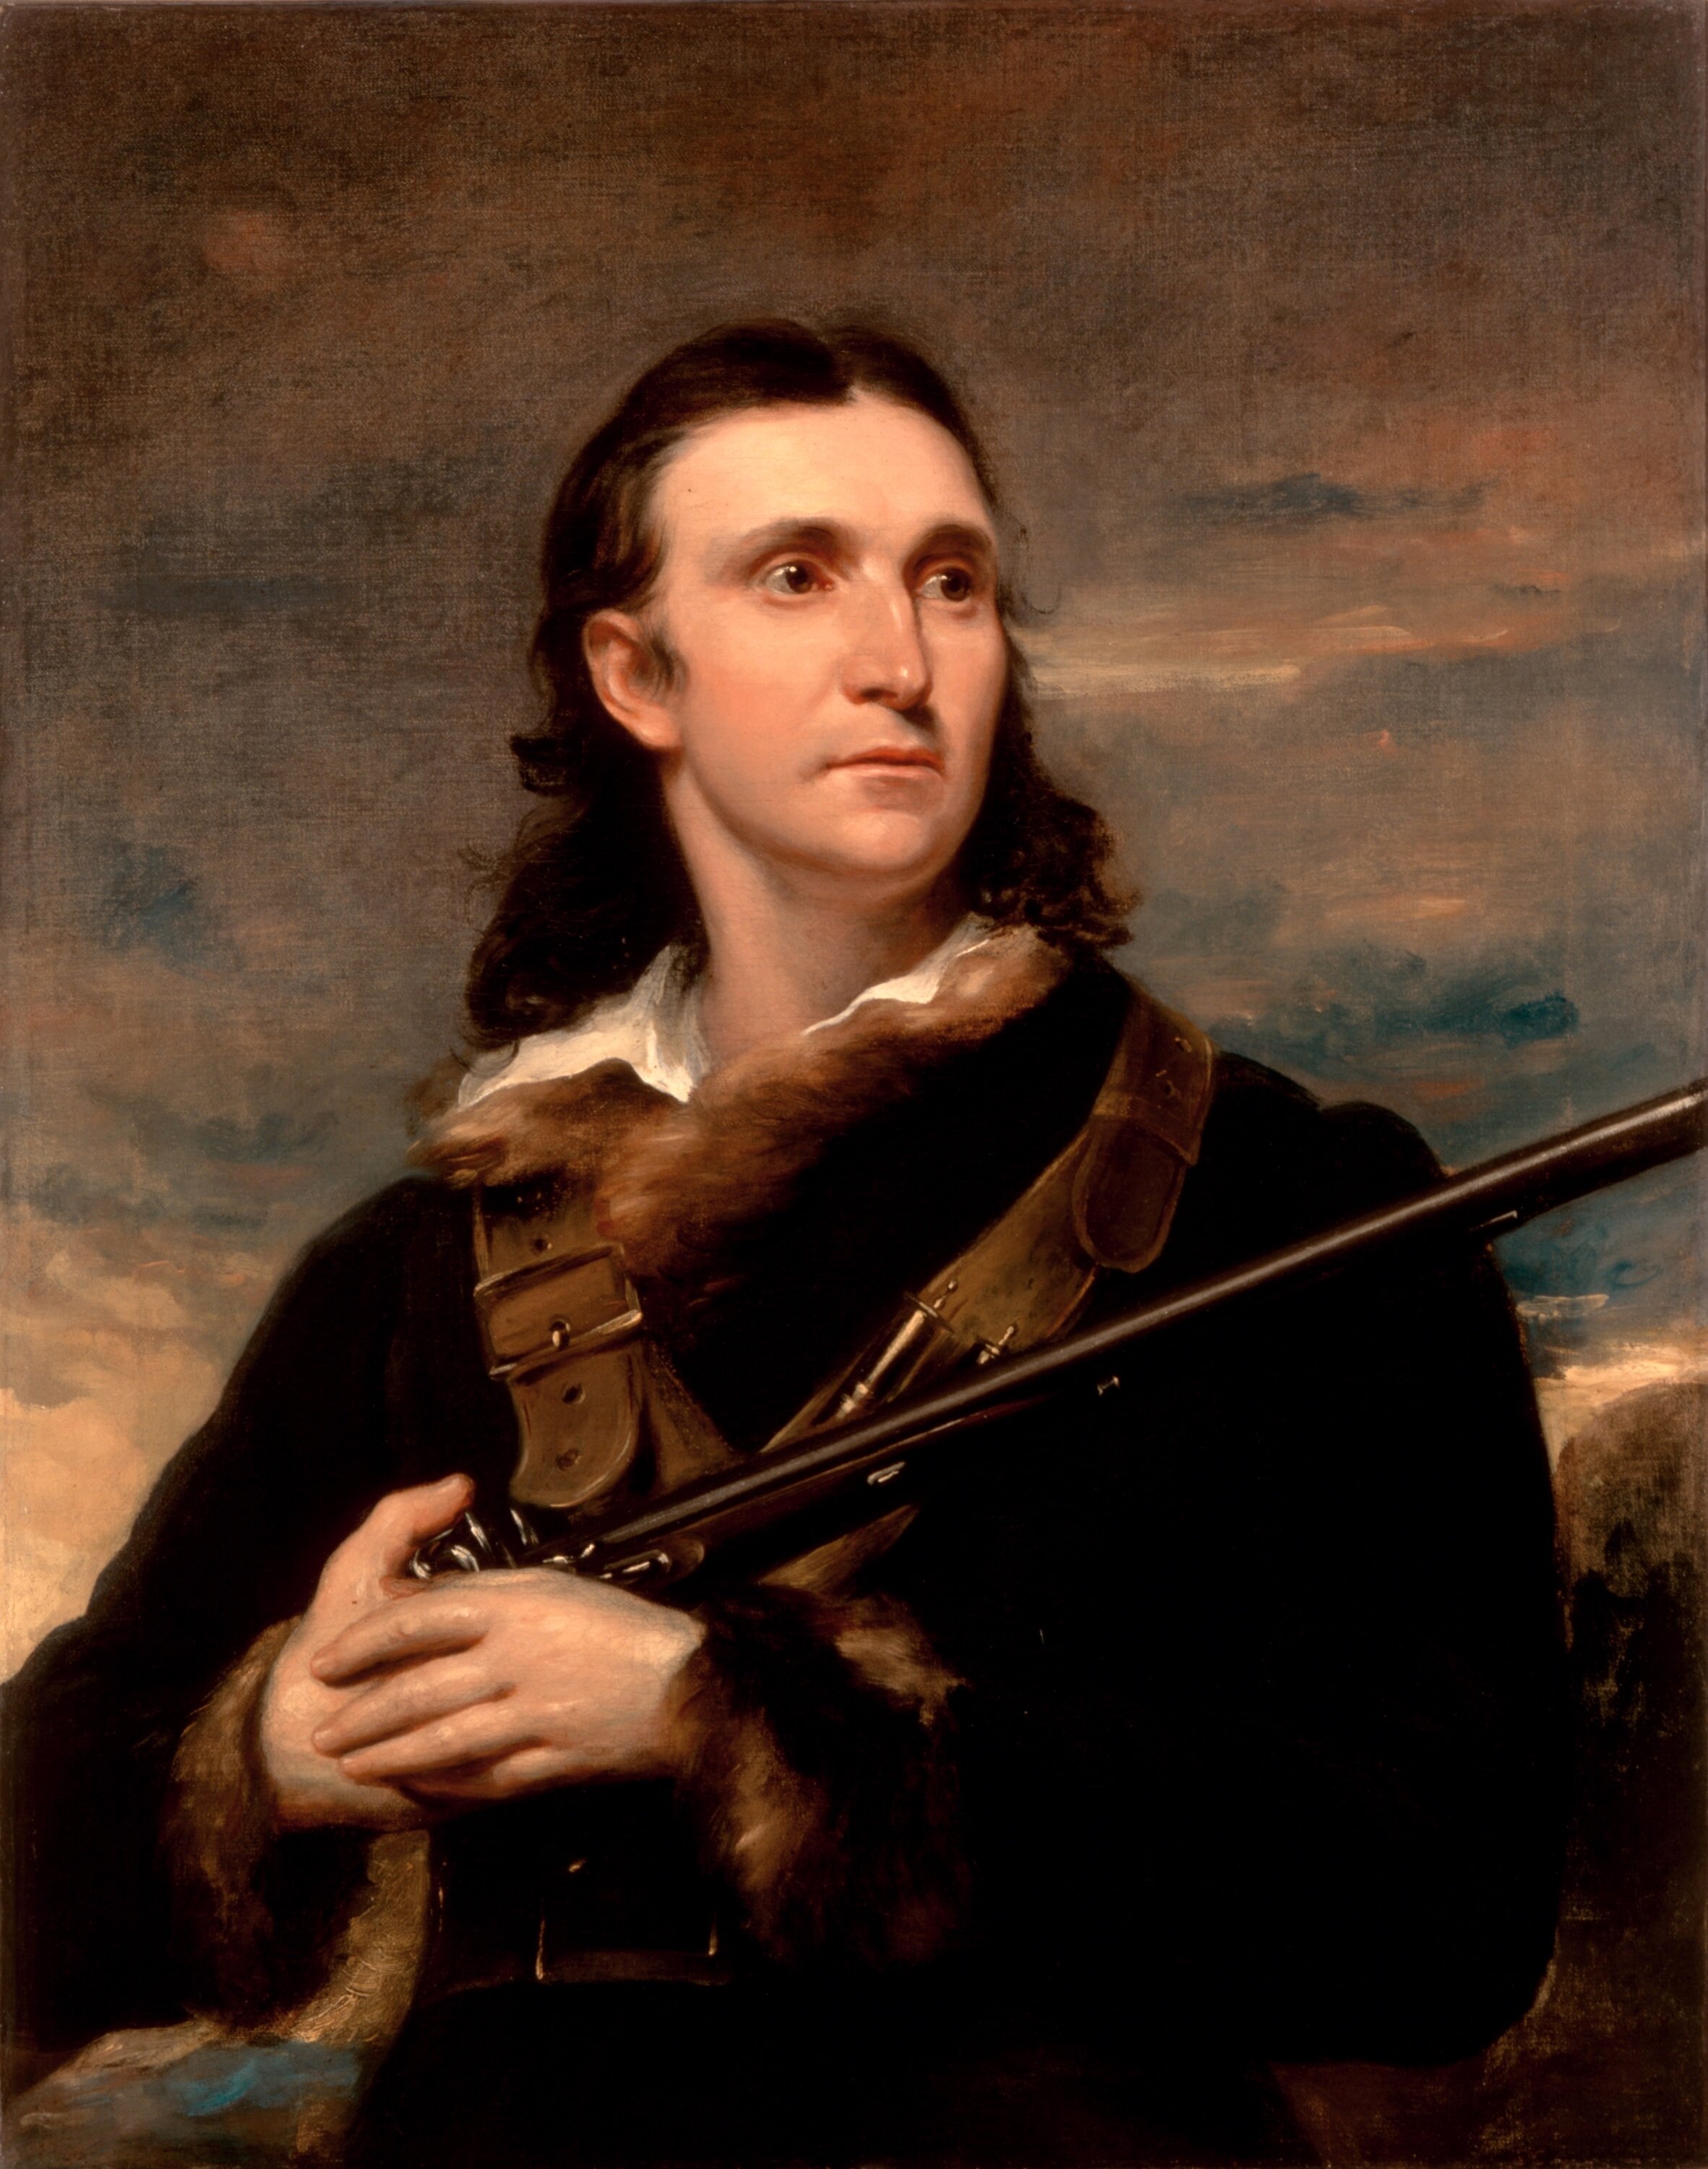 #Have the past misdeeds of John James Audubon come home to roost?